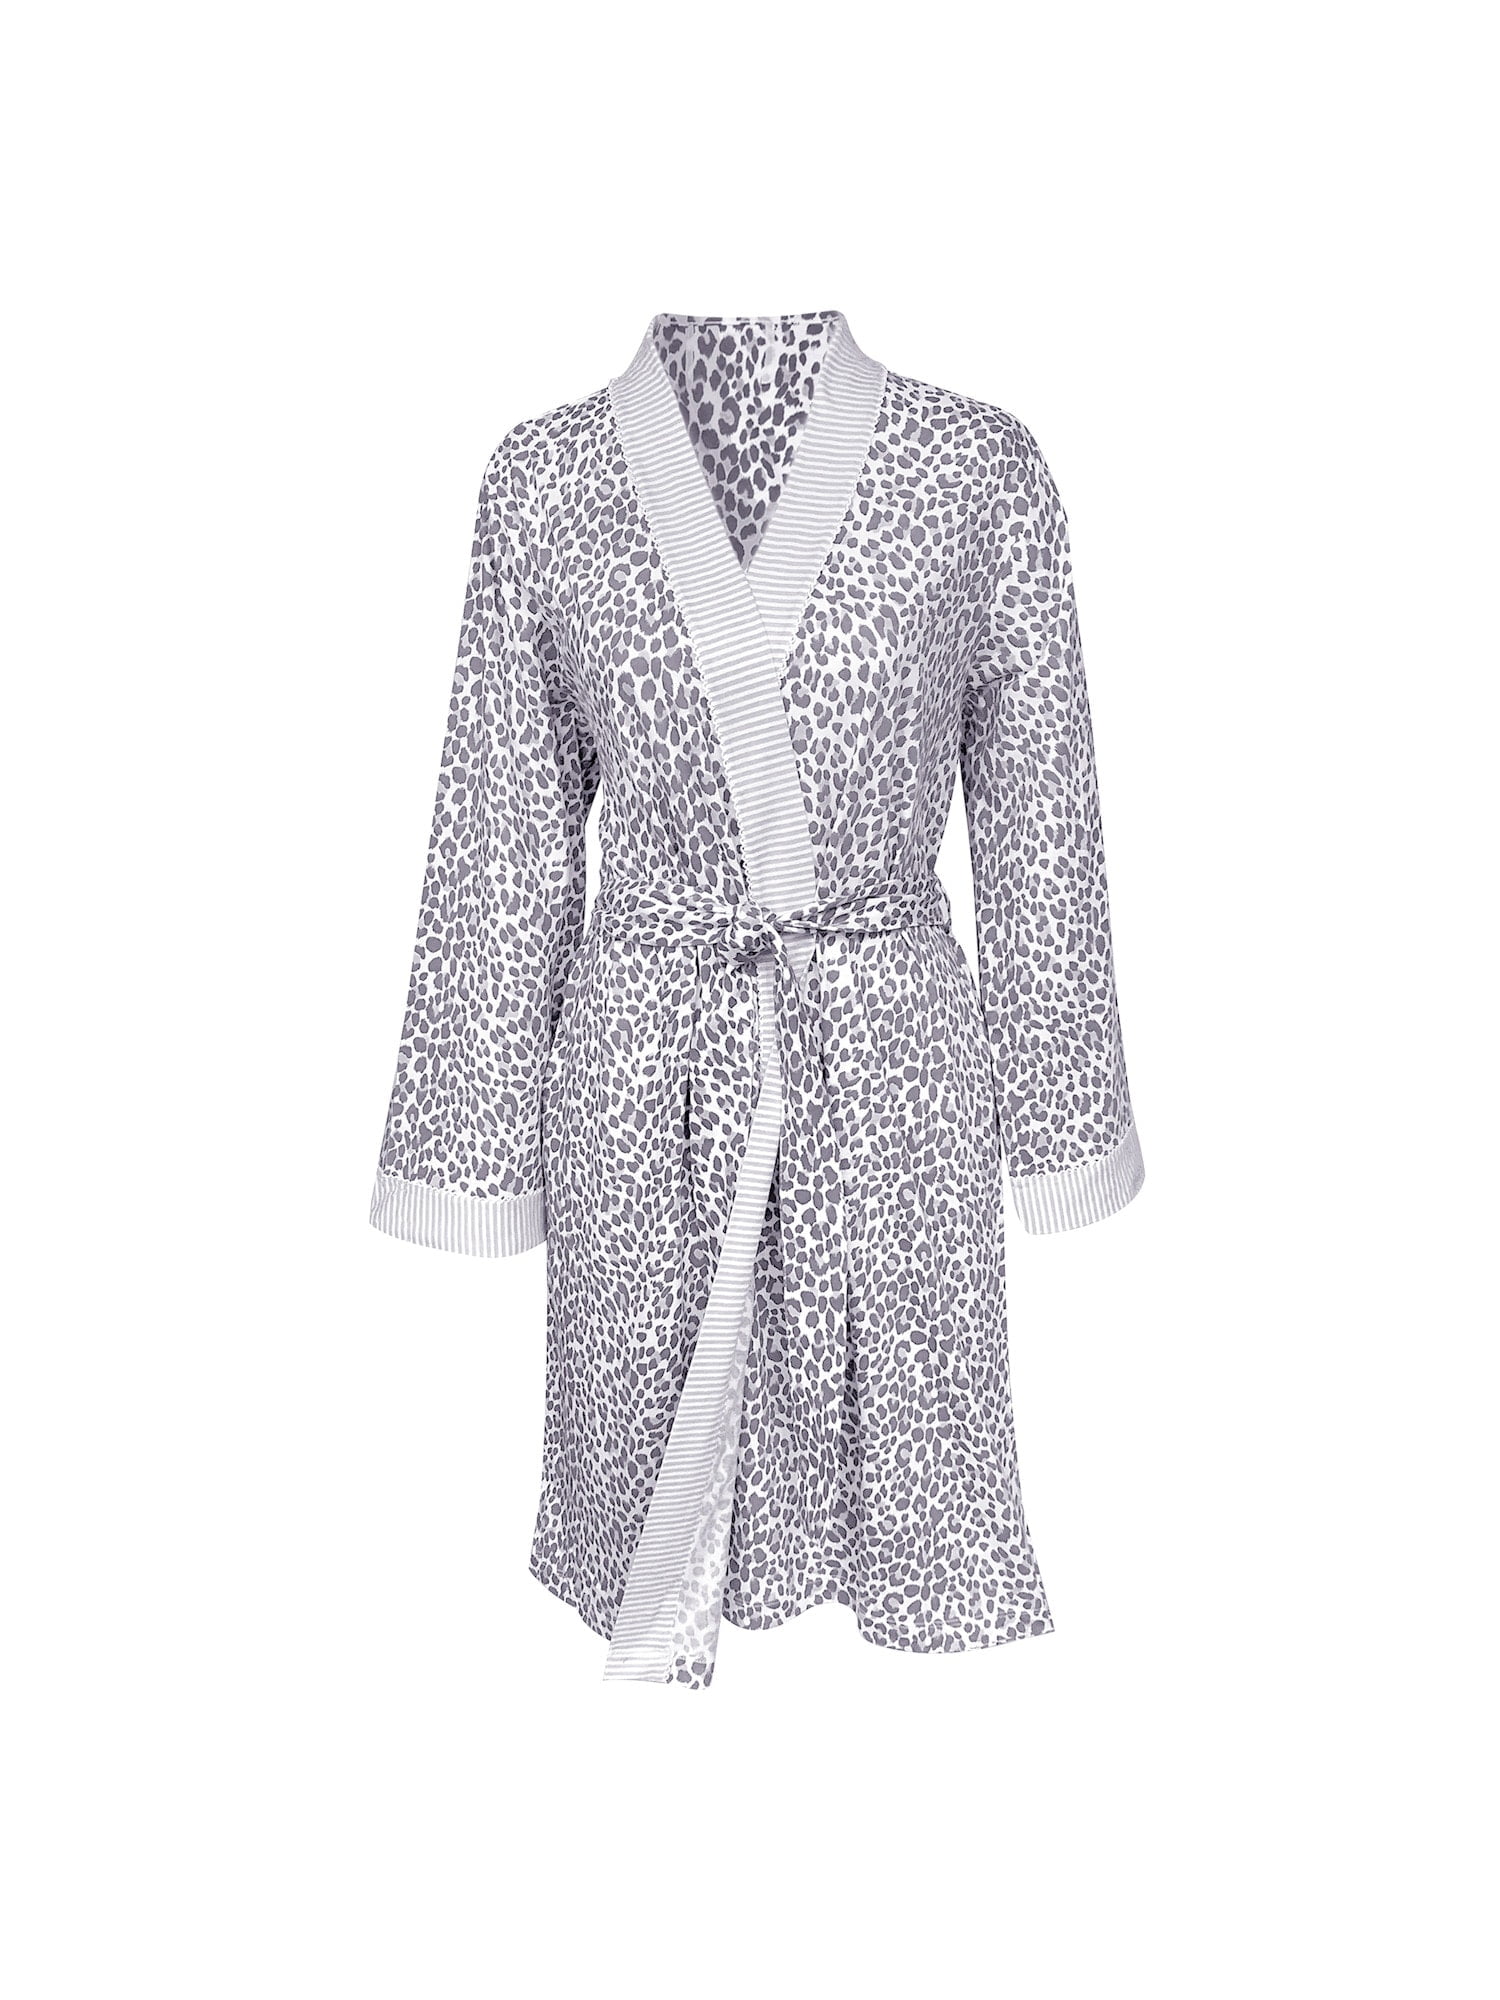 Metropolitan Manufacturing Womens Nightgown and Robe Set Matching Gown ...